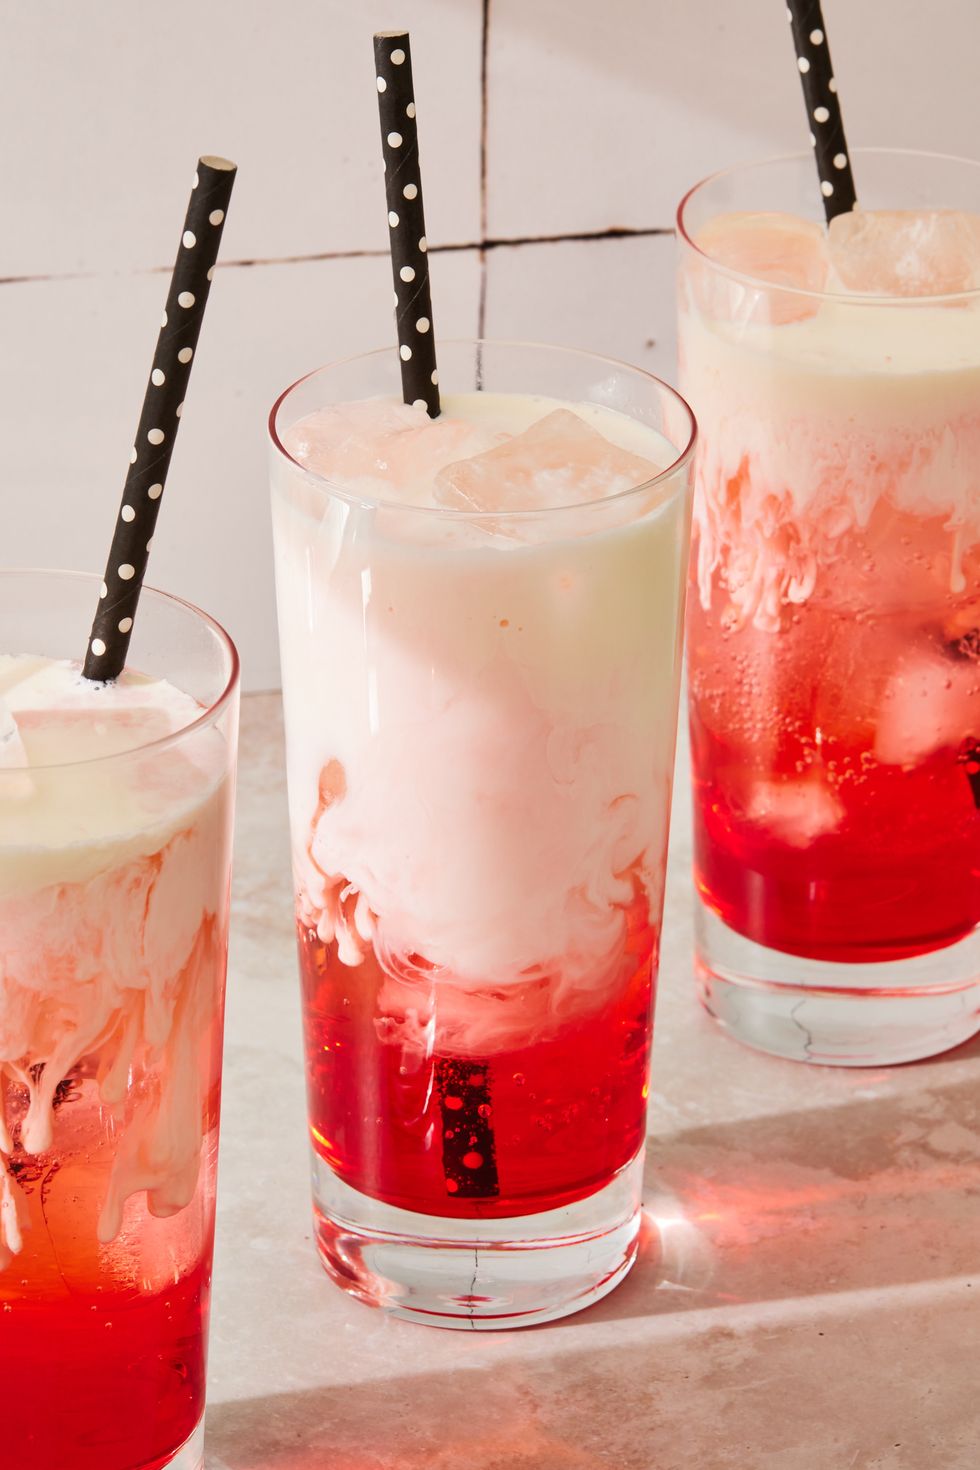 5 Fun Mixed Drinks You Can Make at Home